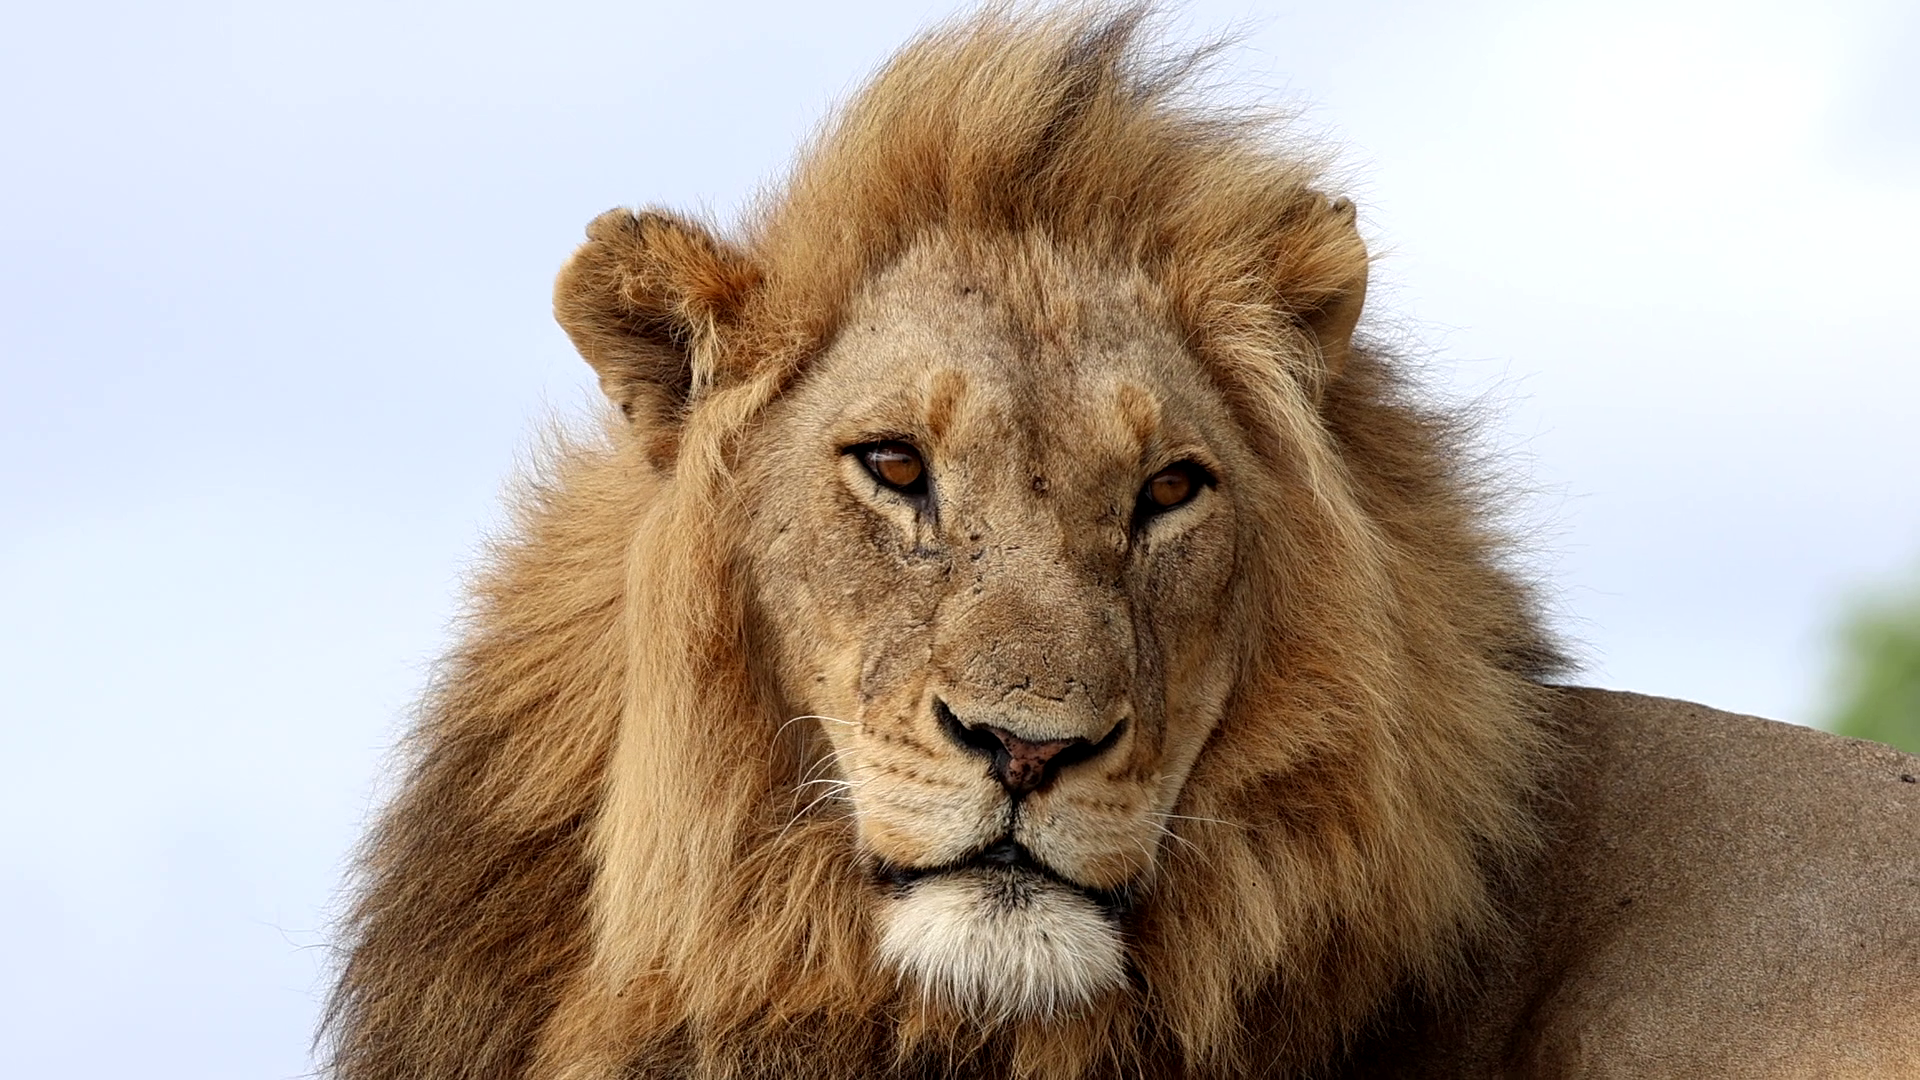 Lions have a profound cultural and symbolic significance in many African cultures and across the world. They are often seen as symbols of courage, royalty, and strength, making them a key attraction for tourists seeking to connect with the continent's rich cultural heritage through its wildlife.